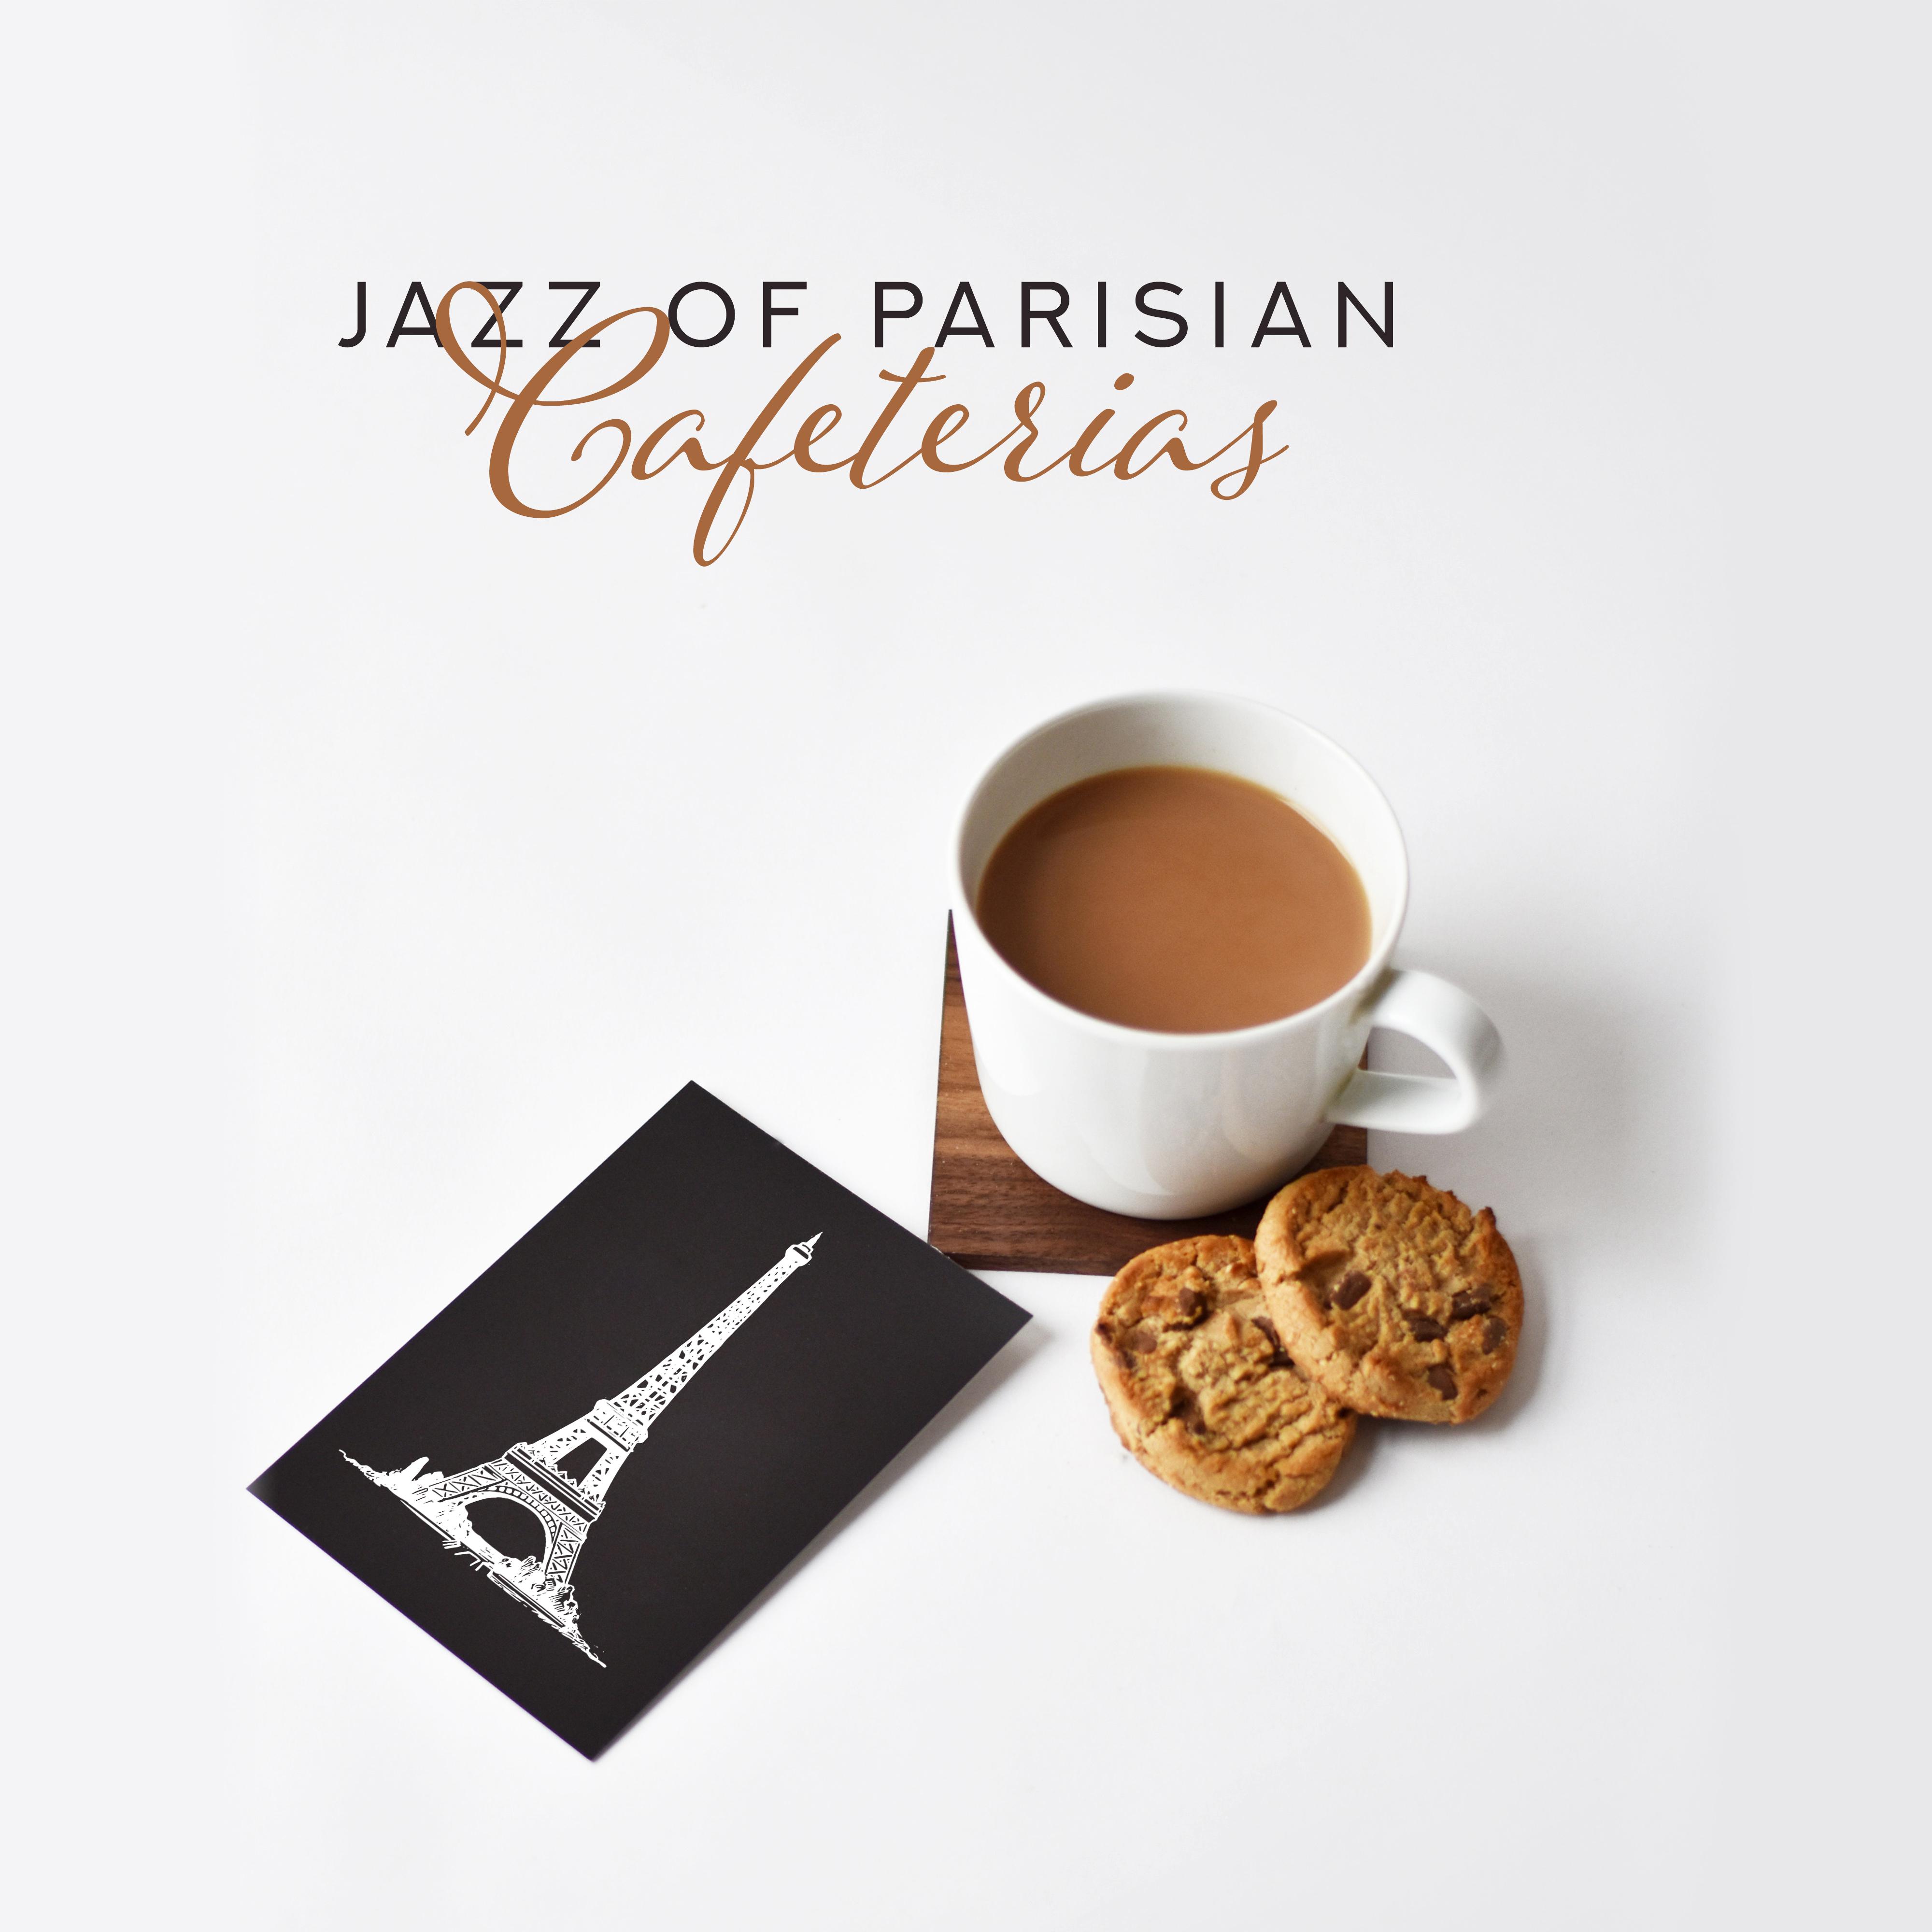 Jazz of Parisian Cafeterias - Instrumental Music with a French Musical Accent